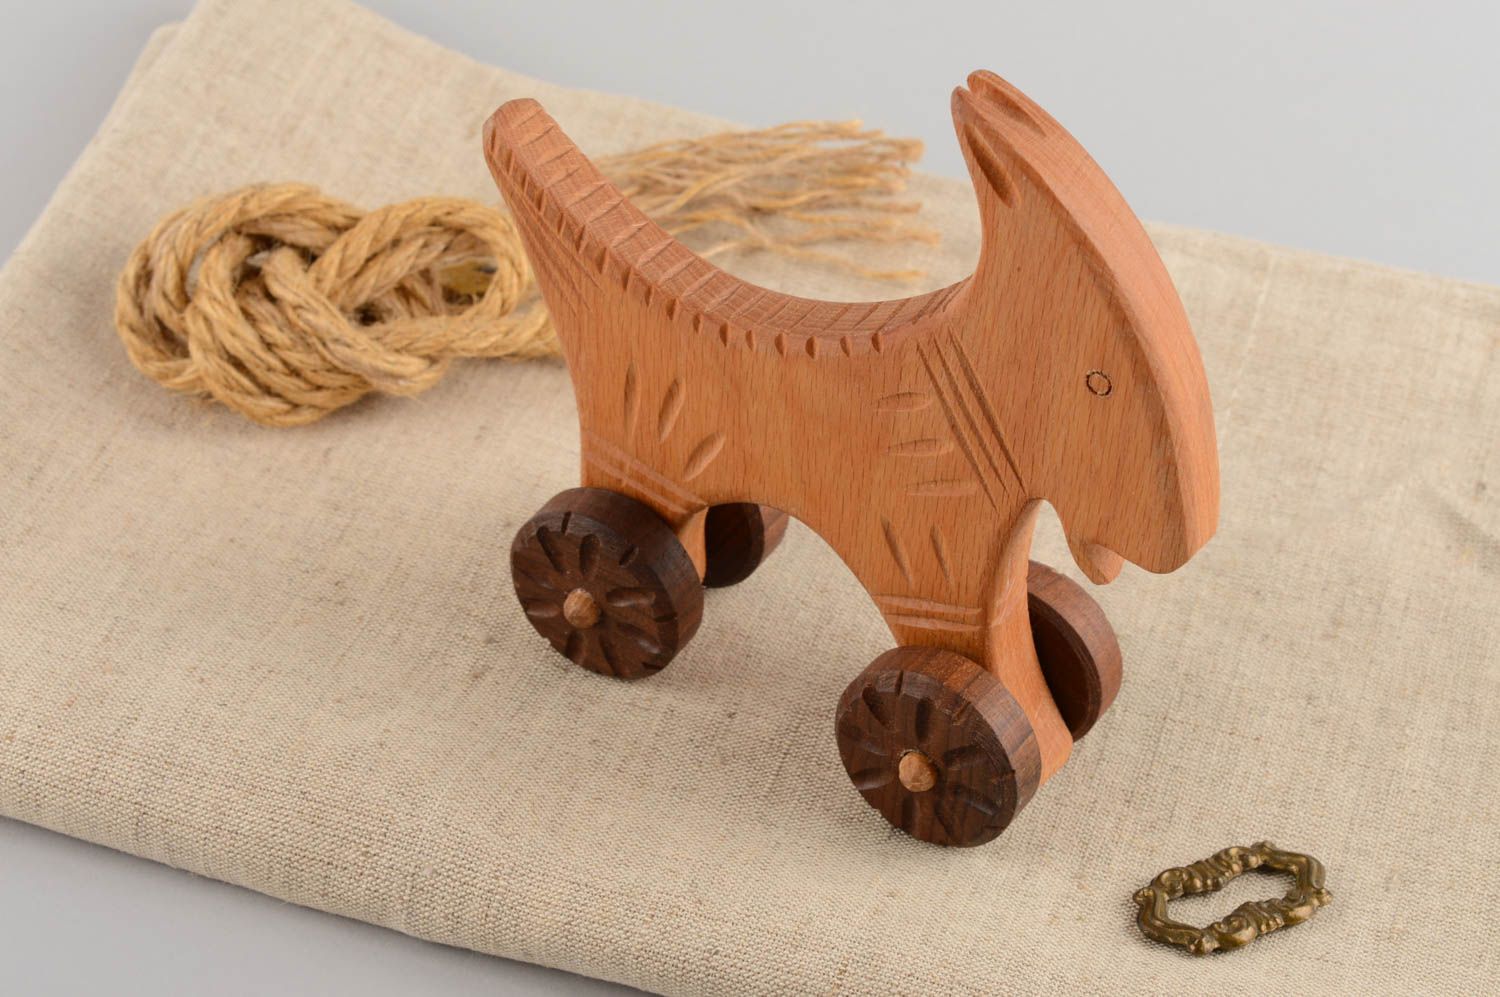 Eco friendly handmade wooden wheeled toy goat for children photo 1